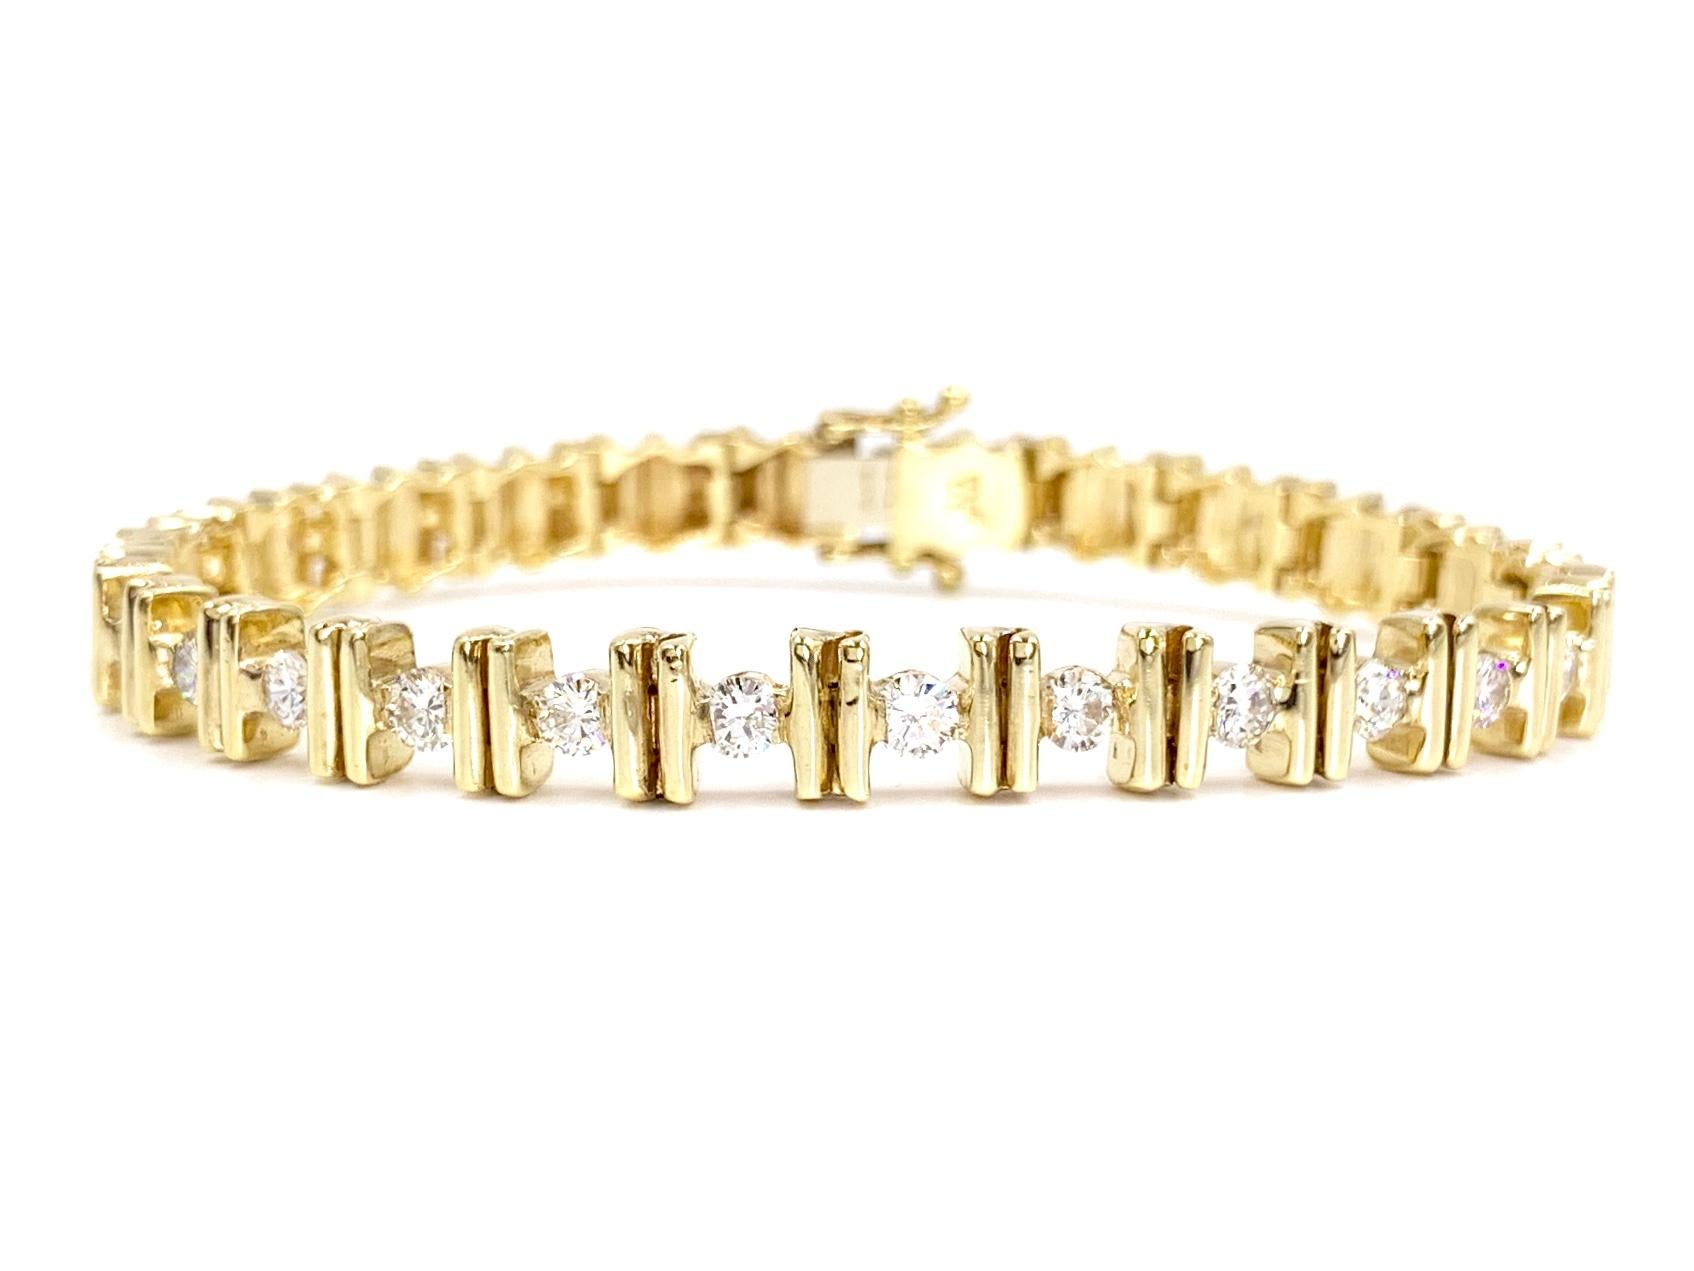 A 14 karat yellow gold polished bar design modern bracelet featuring 12 round brilliant diamonds at 1.21 carats total weight. Diamonds are approximately G color, VS2 clarity (eye clean) with generous sparkle. Bracelet fastens securely with a tongue